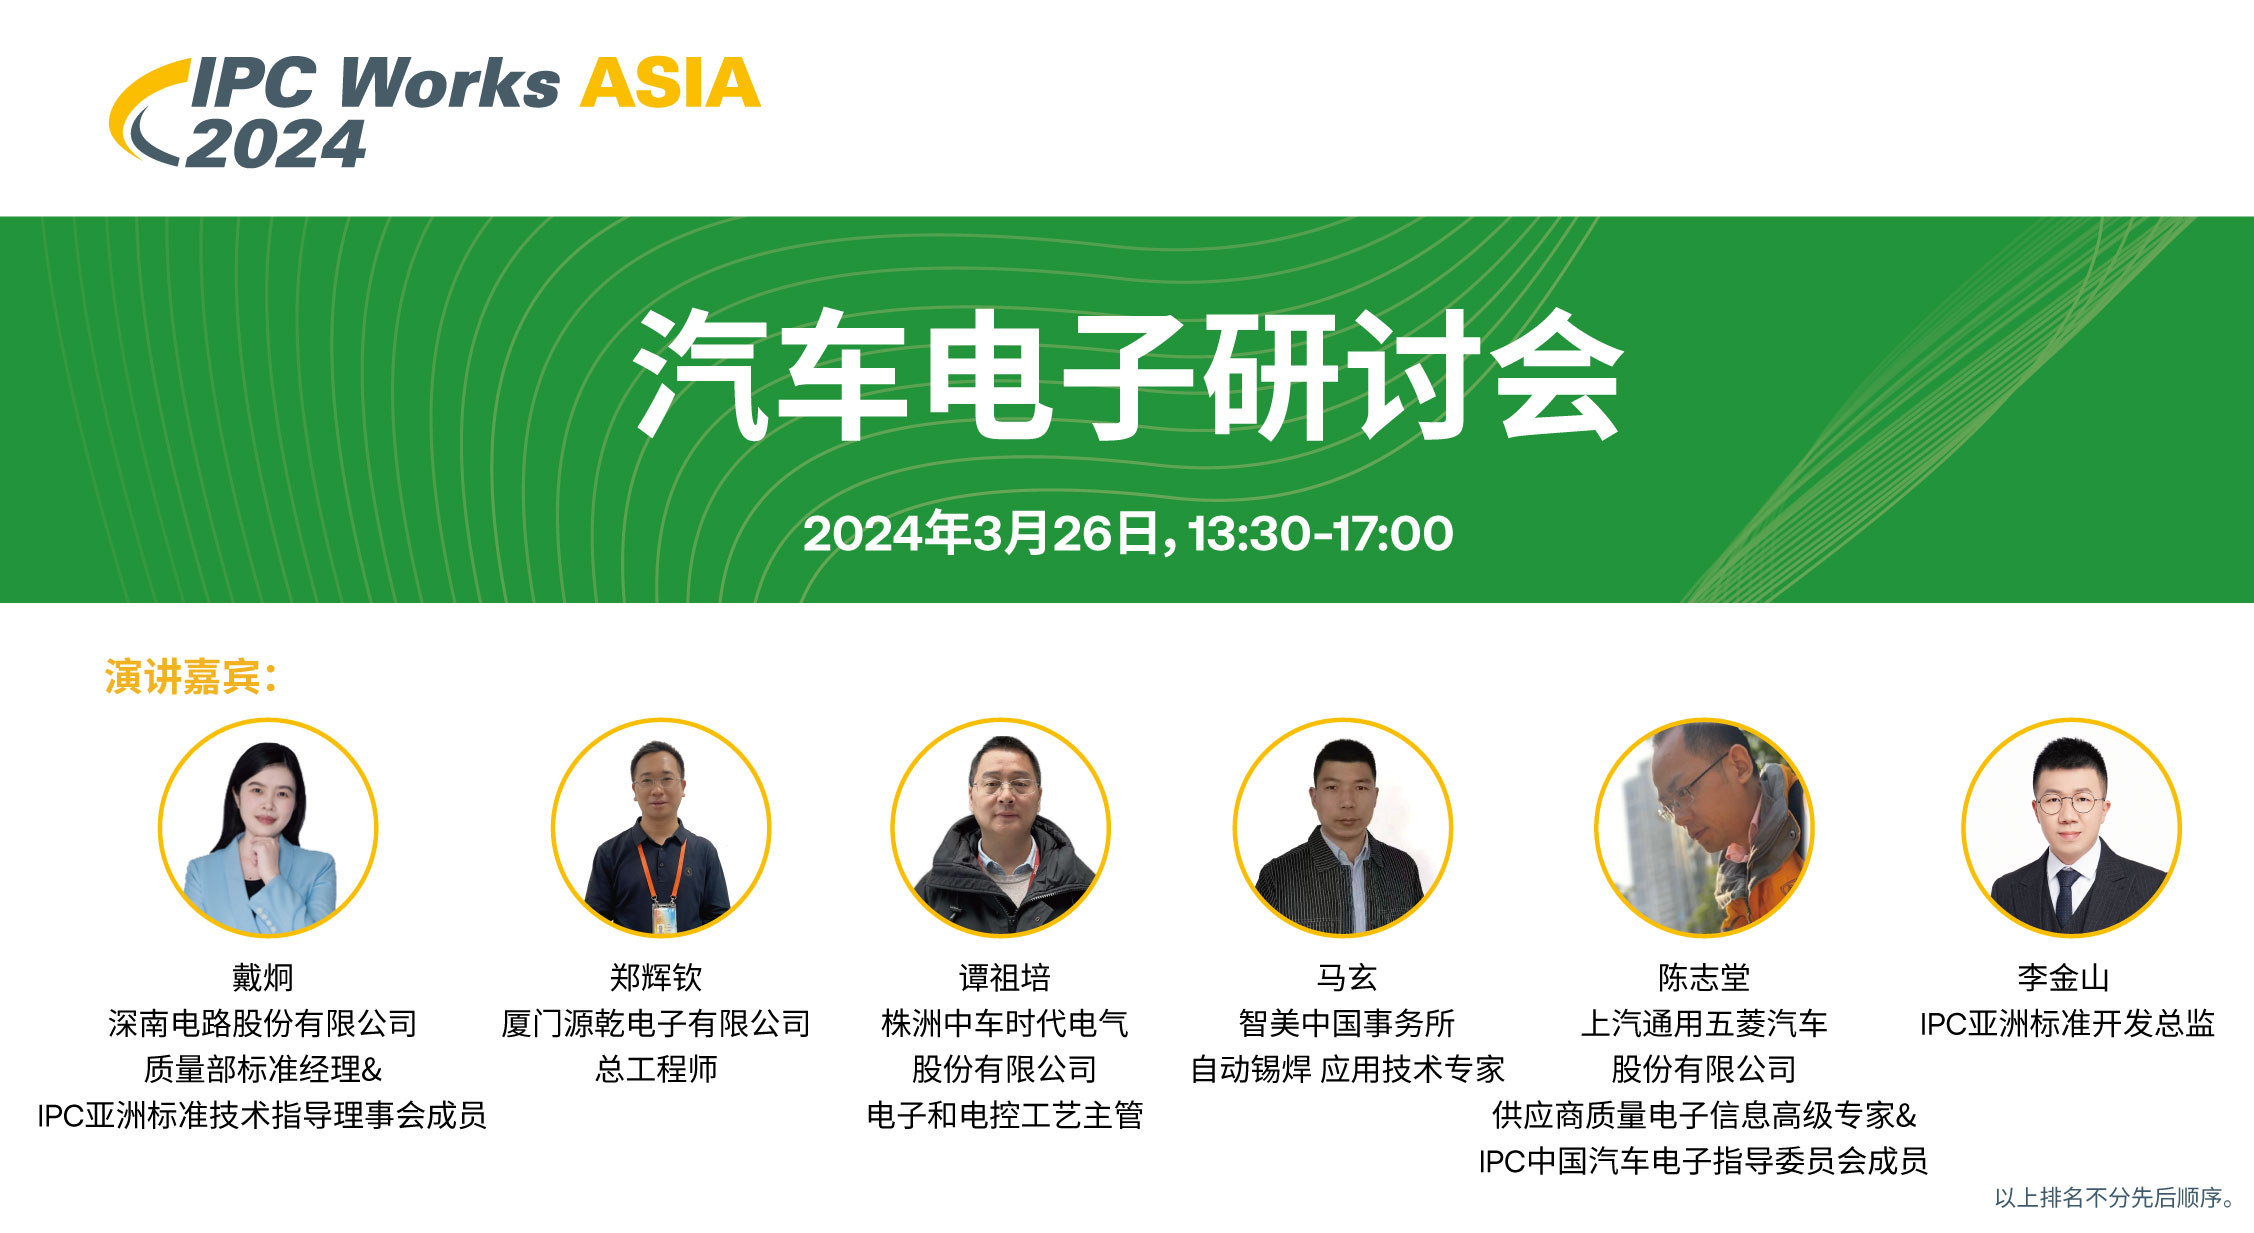 IPC Works Asia Banner